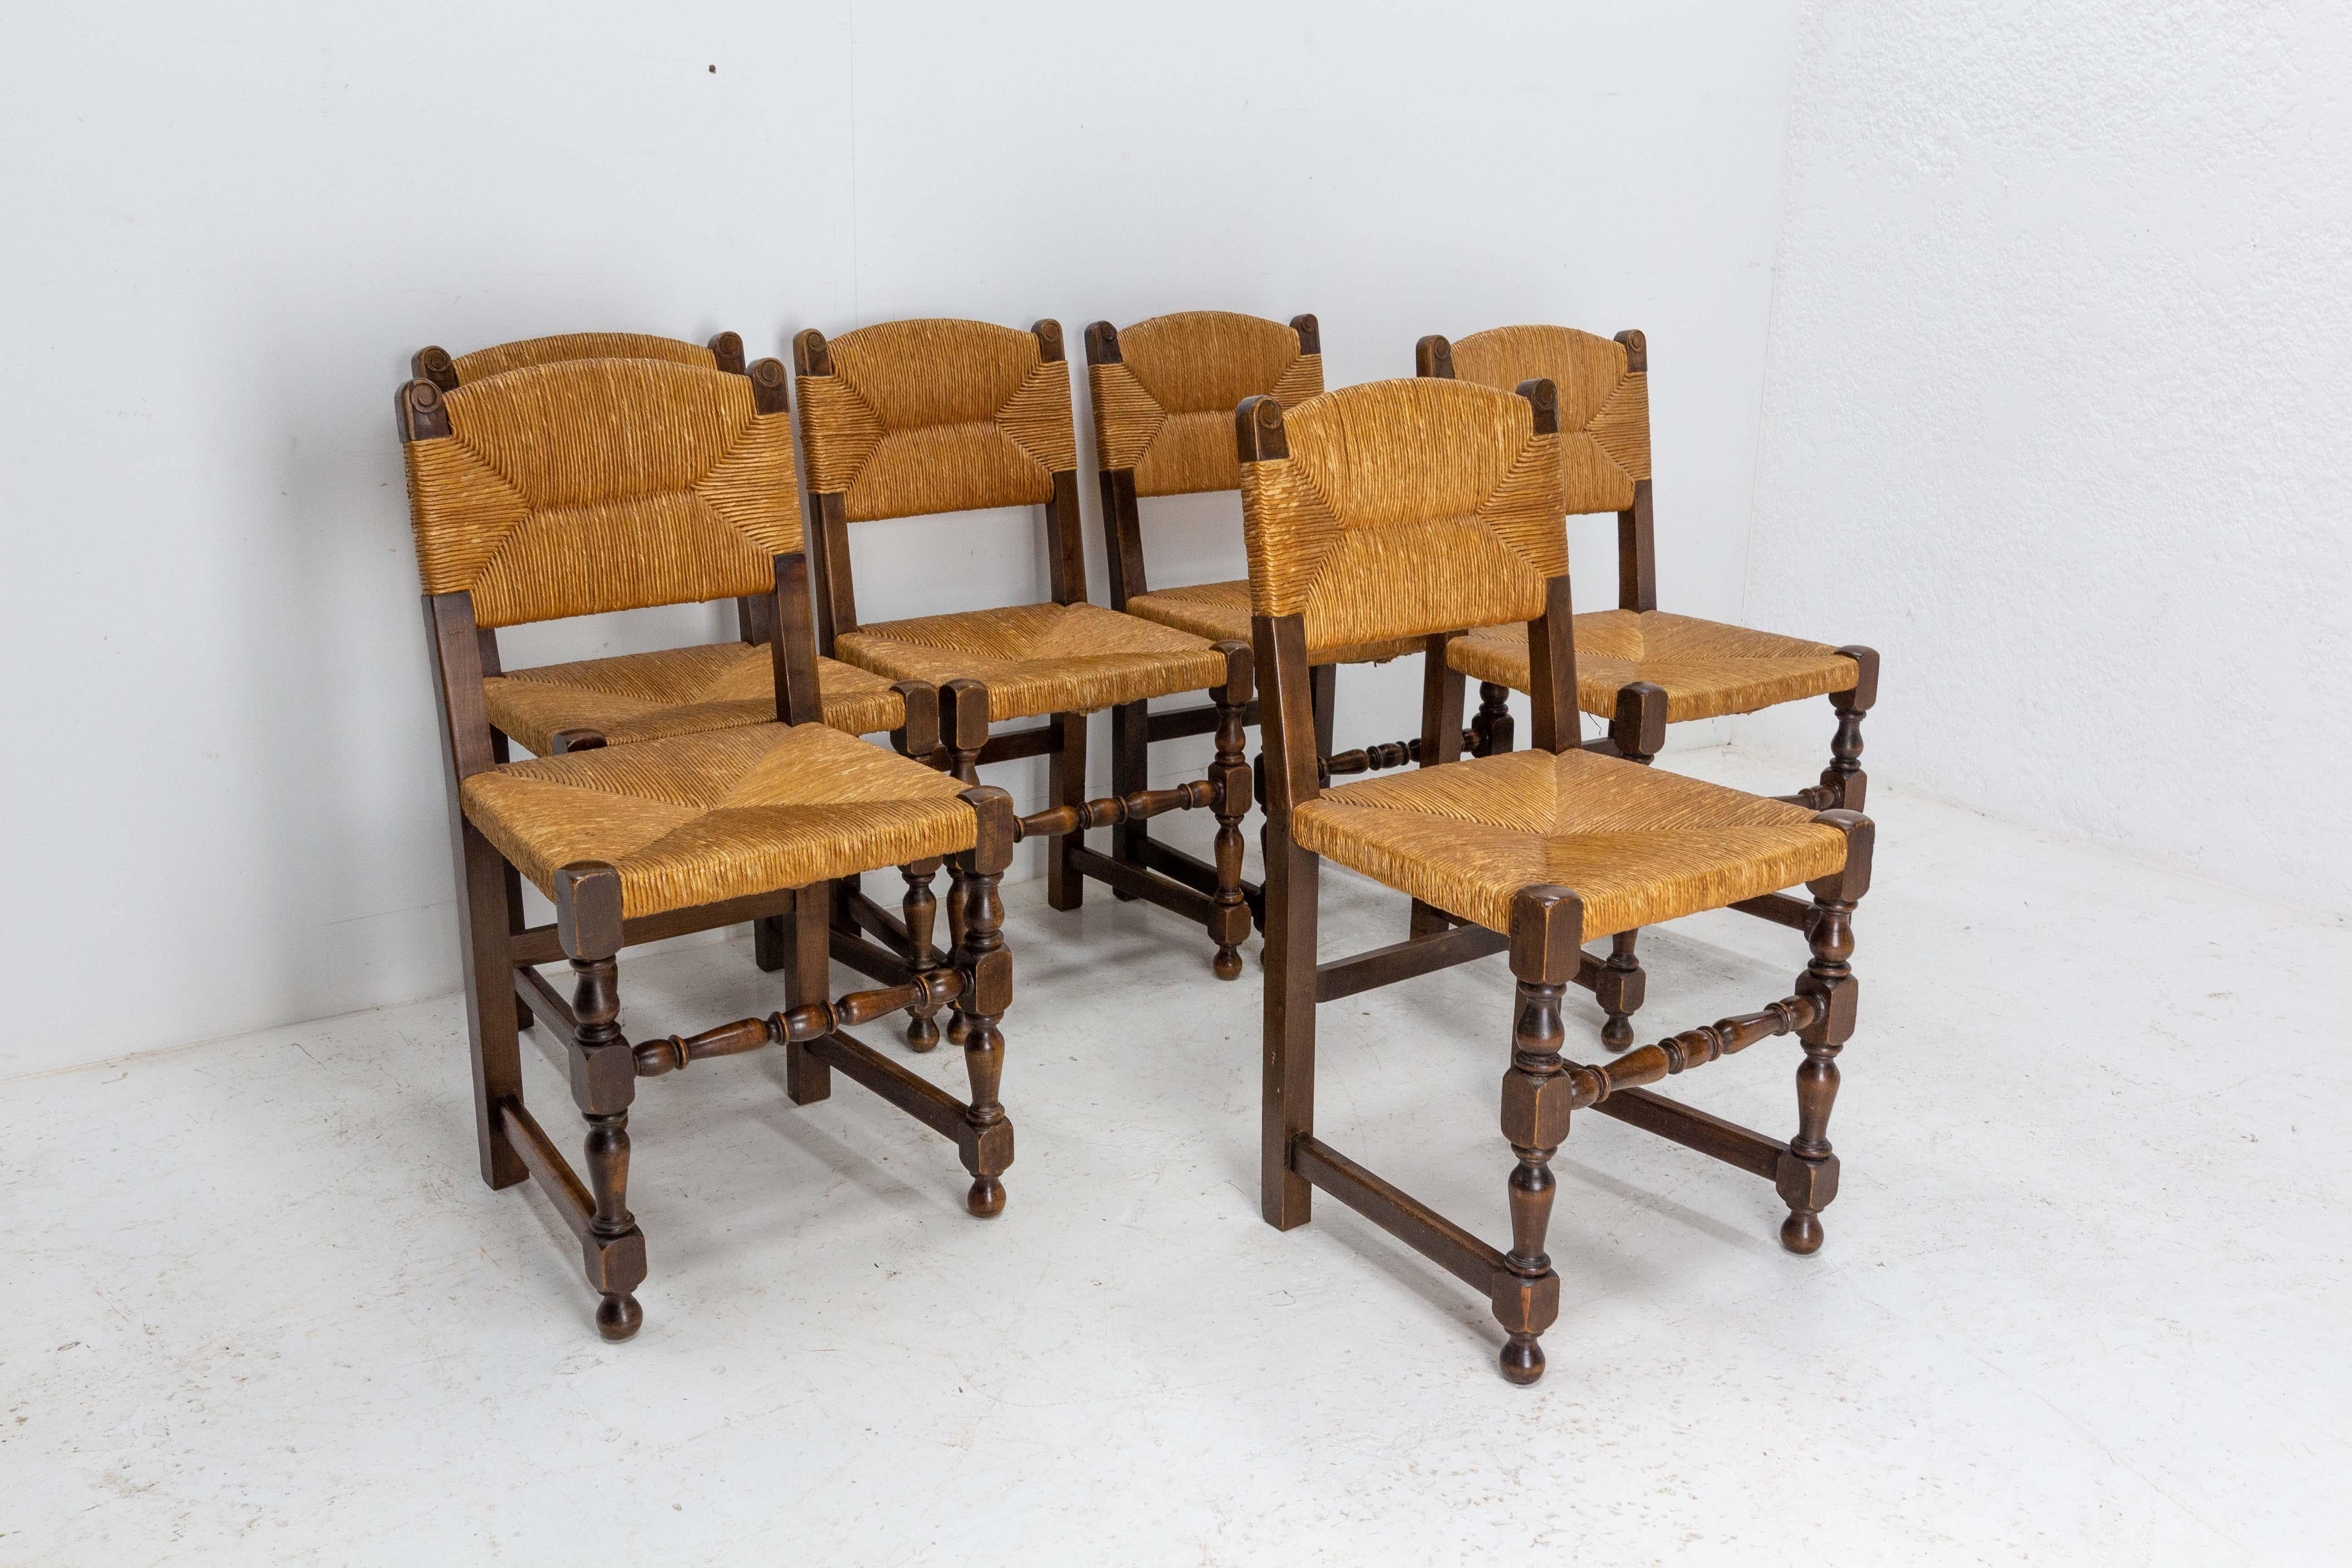 A charming set of six French Provincial oak chairs made in the 1940s.
The rush seats and backs are in excellent antique condition.
The legs are turned.
A set of dining chairs that would make a fabulous addition to a breakfast or dining room or